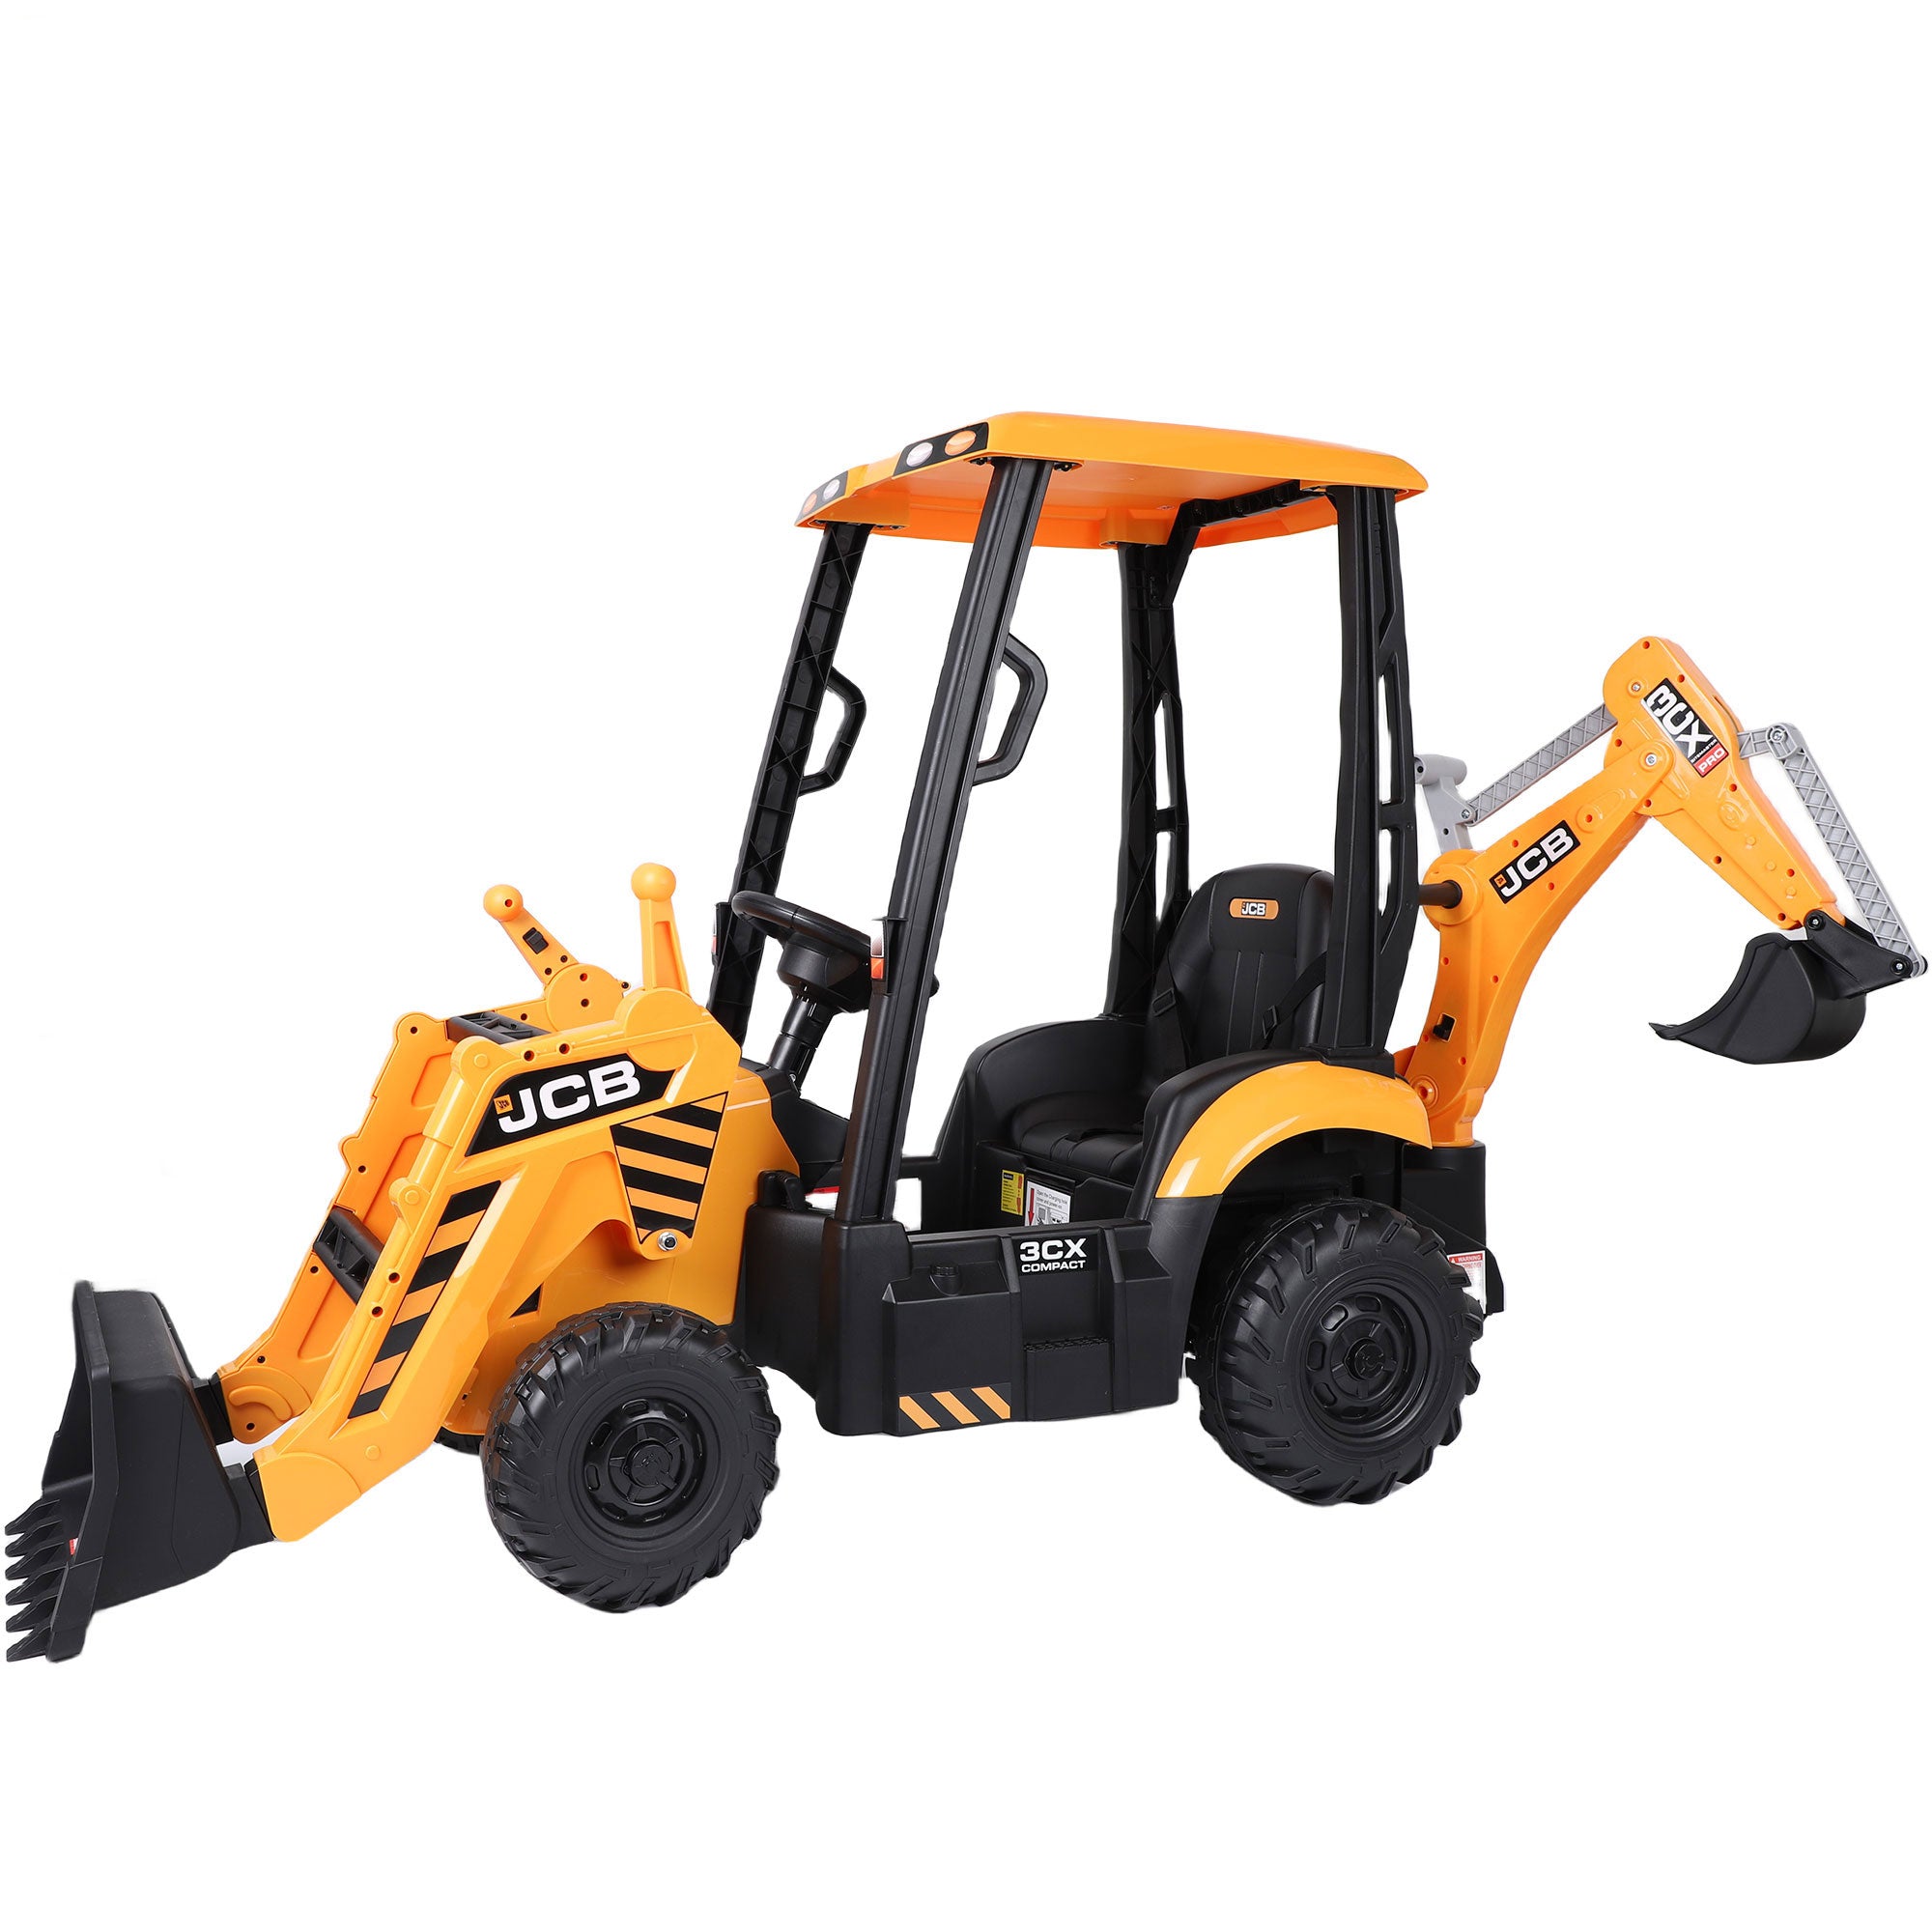 Wisairt Kids Ride on Cars,12V Ride on Excavators Bulldozer,2 in 1 